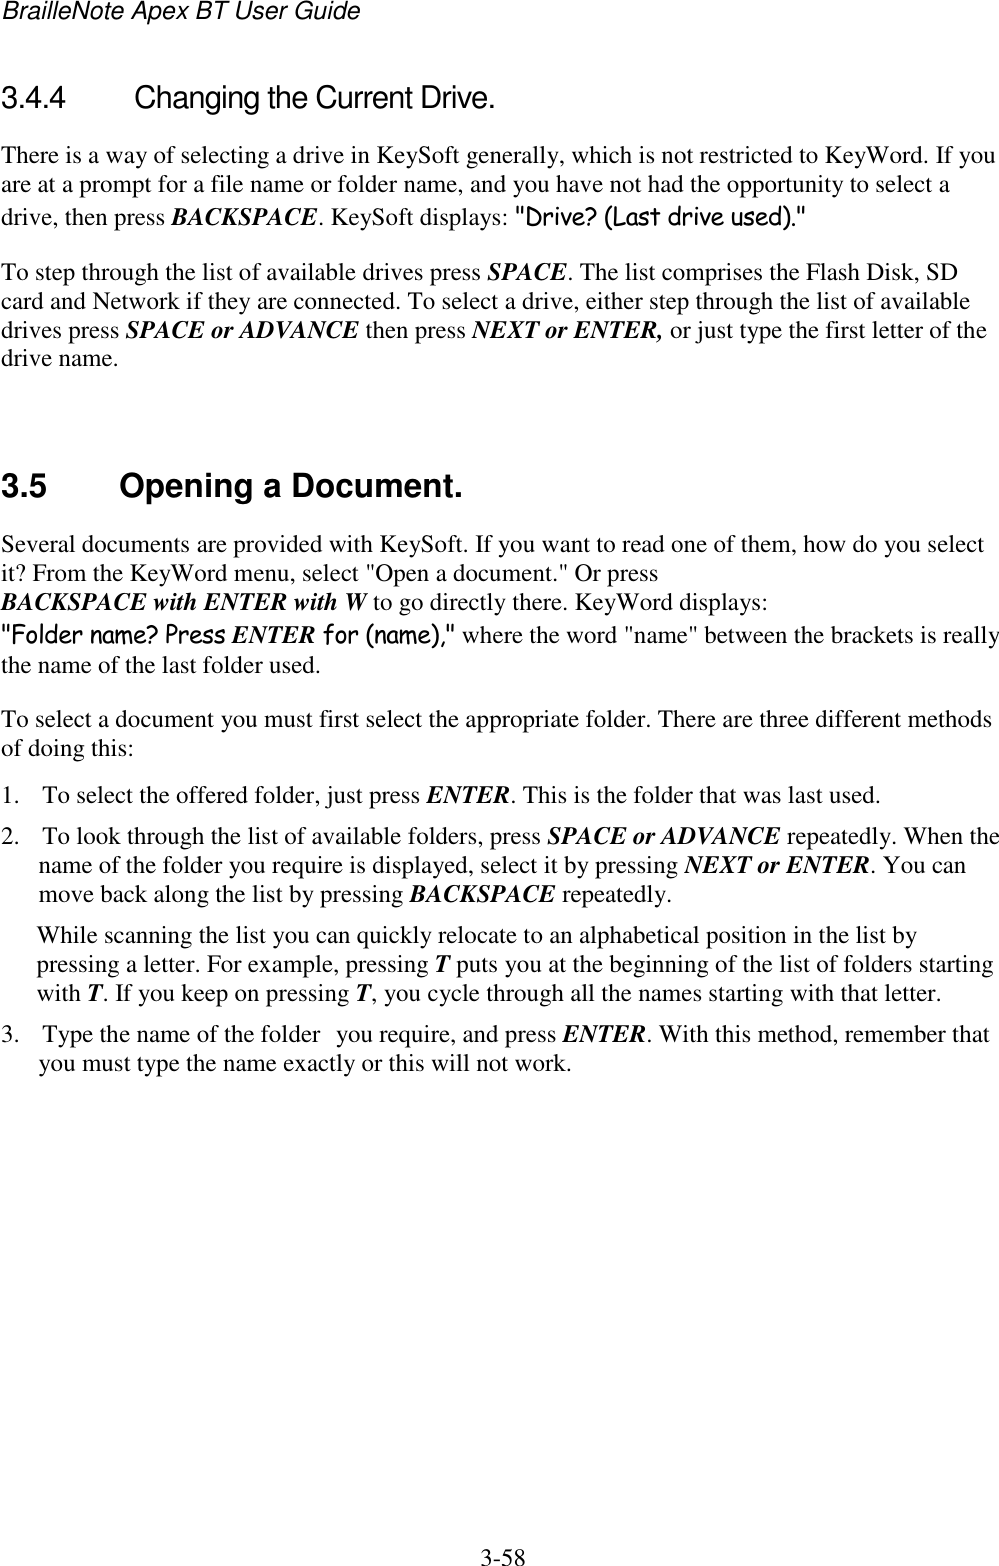 BrailleNote Apex BT User Guide   3-58   3.4.4  Changing the Current Drive. There is a way of selecting a drive in KeySoft generally, which is not restricted to KeyWord. If you are at a prompt for a file name or folder name, and you have not had the opportunity to select a drive, then press BACKSPACE. KeySoft displays: &quot;Drive? (Last drive used).&quot; To step through the list of available drives press SPACE. The list comprises the Flash Disk, SD card and Network if they are connected. To select a drive, either step through the list of available drives press SPACE or ADVANCE then press NEXT or ENTER, or just type the first letter of the drive name.    3.5  Opening a Document. Several documents are provided with KeySoft. If you want to read one of them, how do you select it? From the KeyWord menu, select &quot;Open a document.&quot; Or press BACKSPACE with ENTER with W to go directly there. KeyWord displays: &quot;Folder name? Press ENTER for (name),&quot; where the word &quot;name&quot; between the brackets is really the name of the last folder used. To select a document you must first select the appropriate folder. There are three different methods of doing this: 1. To select the offered folder, just press ENTER. This is the folder that was last used. 2. To look through the list of available folders, press SPACE or ADVANCE repeatedly. When the name of the folder you require is displayed, select it by pressing NEXT or ENTER. You can move back along the list by pressing BACKSPACE repeatedly. While scanning the list you can quickly relocate to an alphabetical position in the list by pressing a letter. For example, pressing T puts you at the beginning of the list of folders starting with T. If you keep on pressing T, you cycle through all the names starting with that letter. 3. Type the name of the folder you require, and press ENTER. With this method, remember that you must type the name exactly or this will not work. 